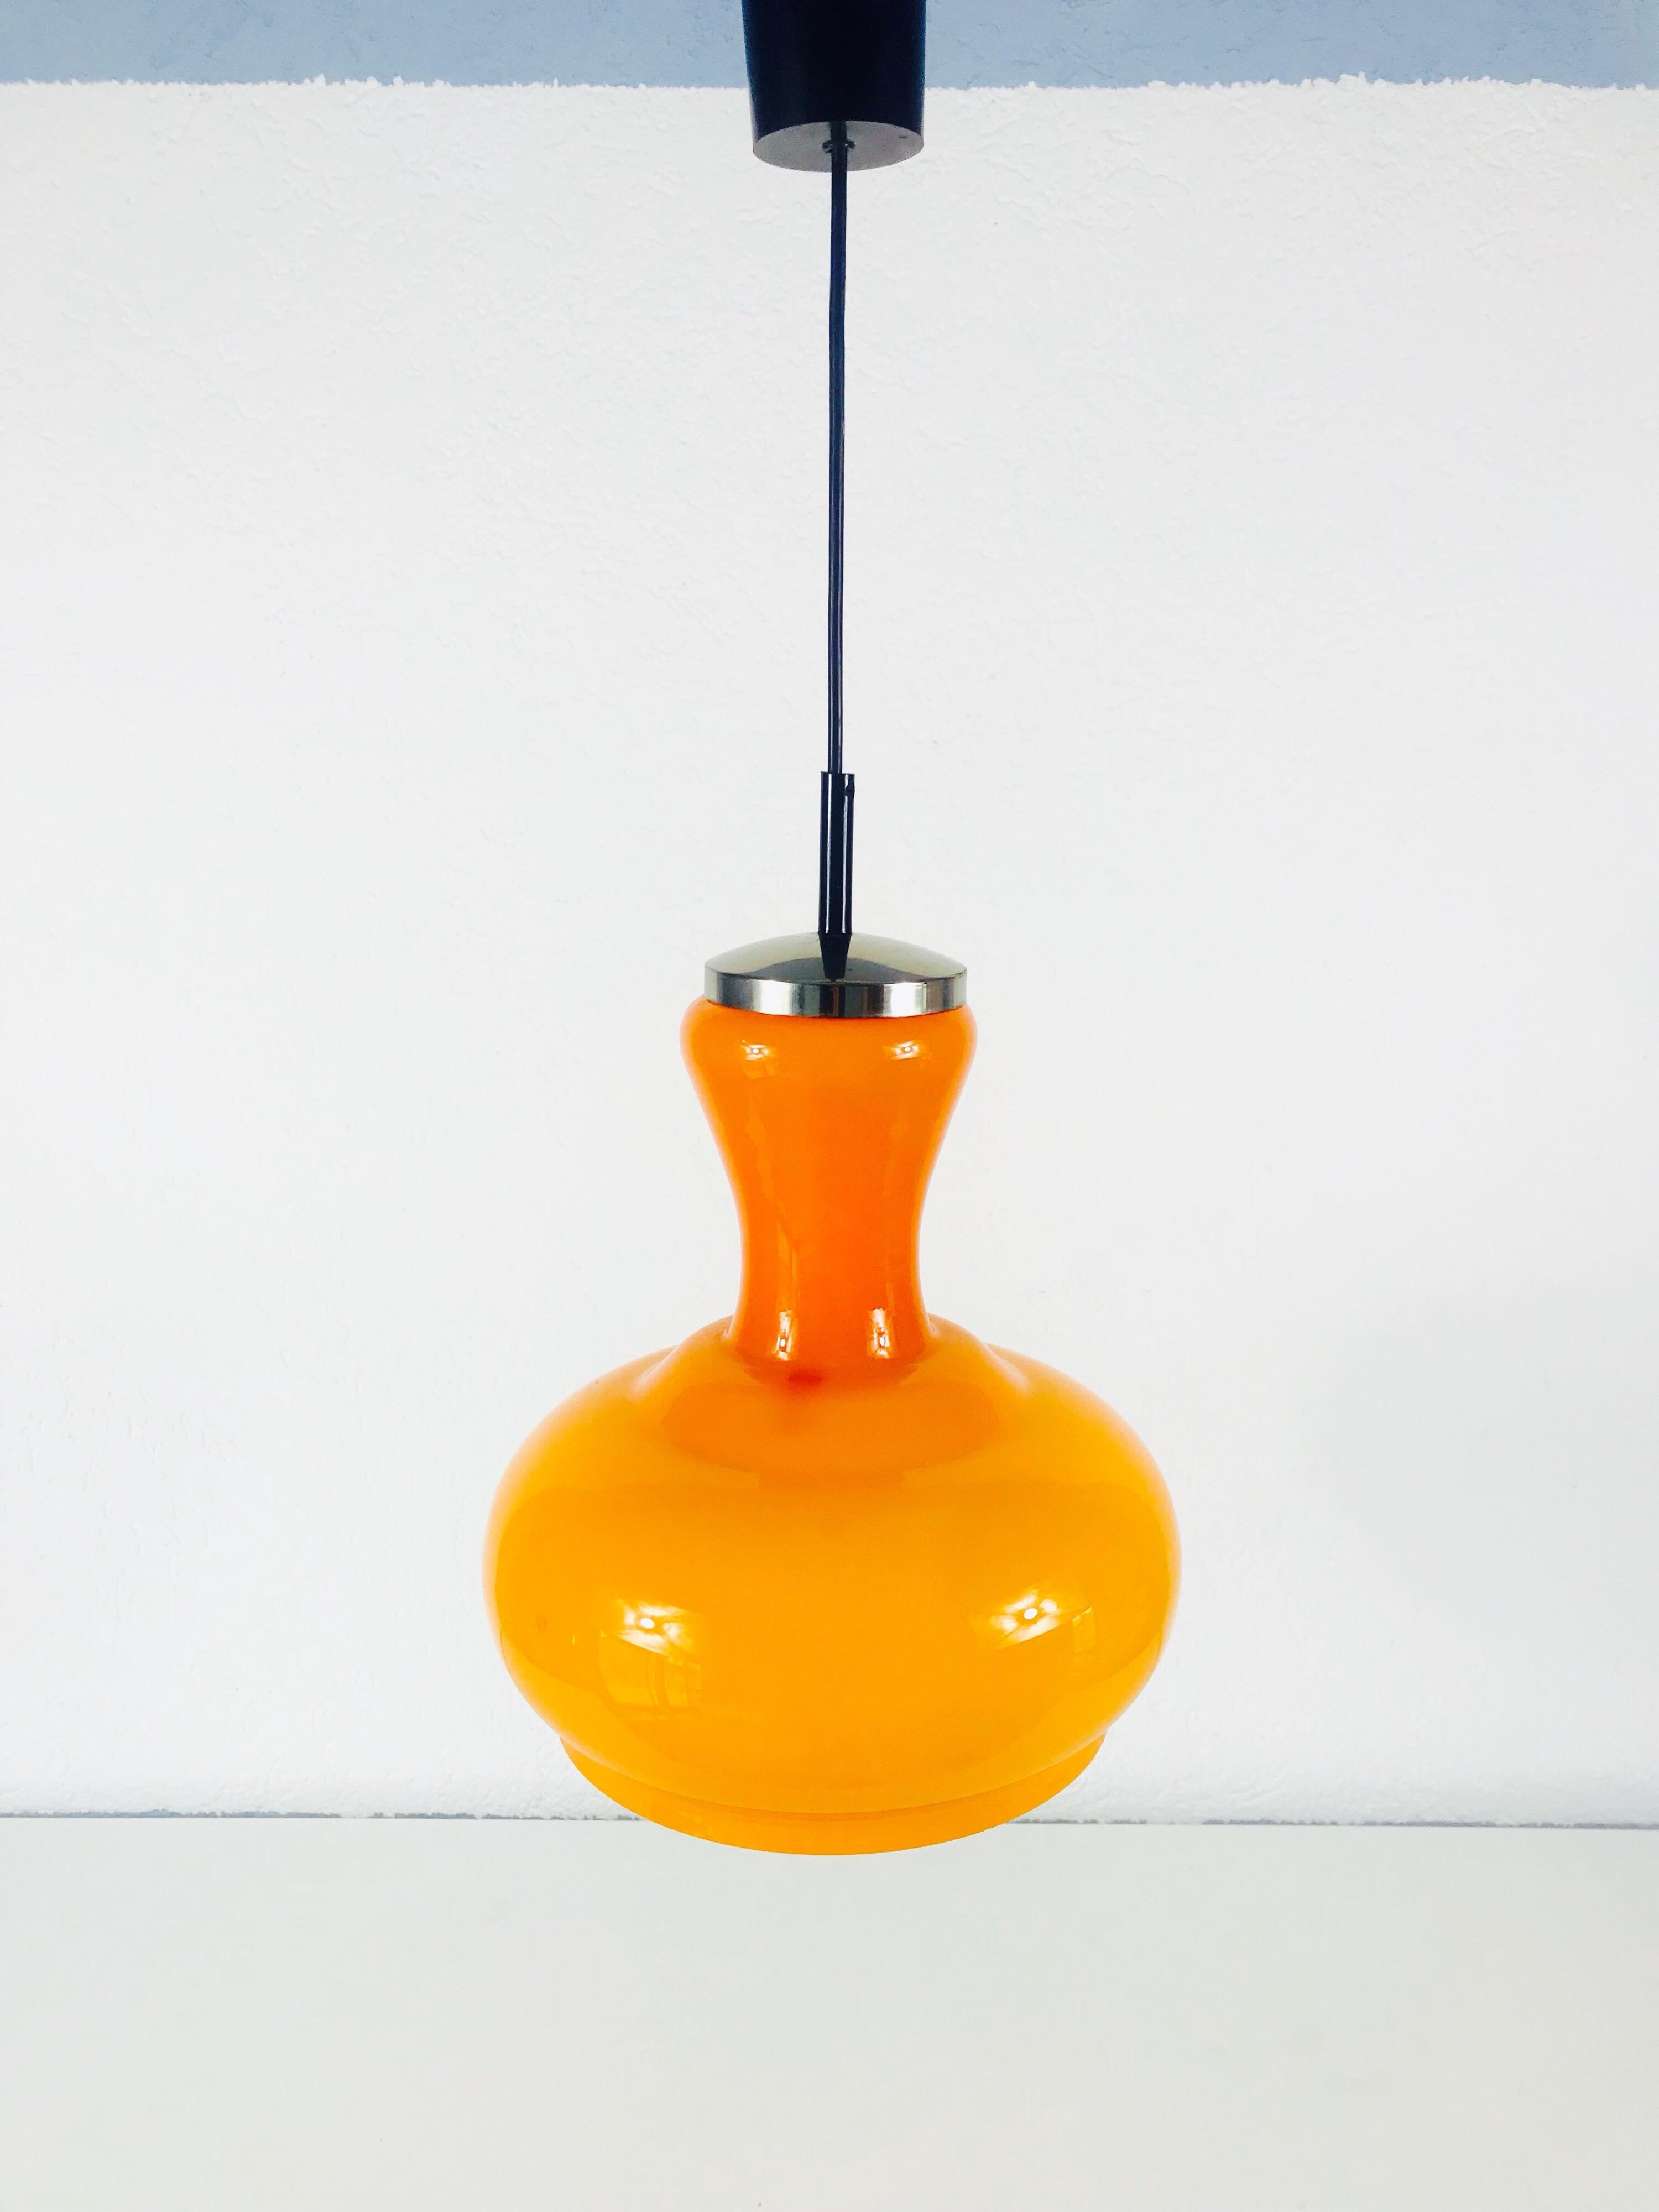 Orange glass hanging lamp from Peill & Putzler made in Germany in the 1970s. It has a Space Age design.

Measurements:

Height 57 cm

Diameter 26 cm

The light requires one E27 light bulb.